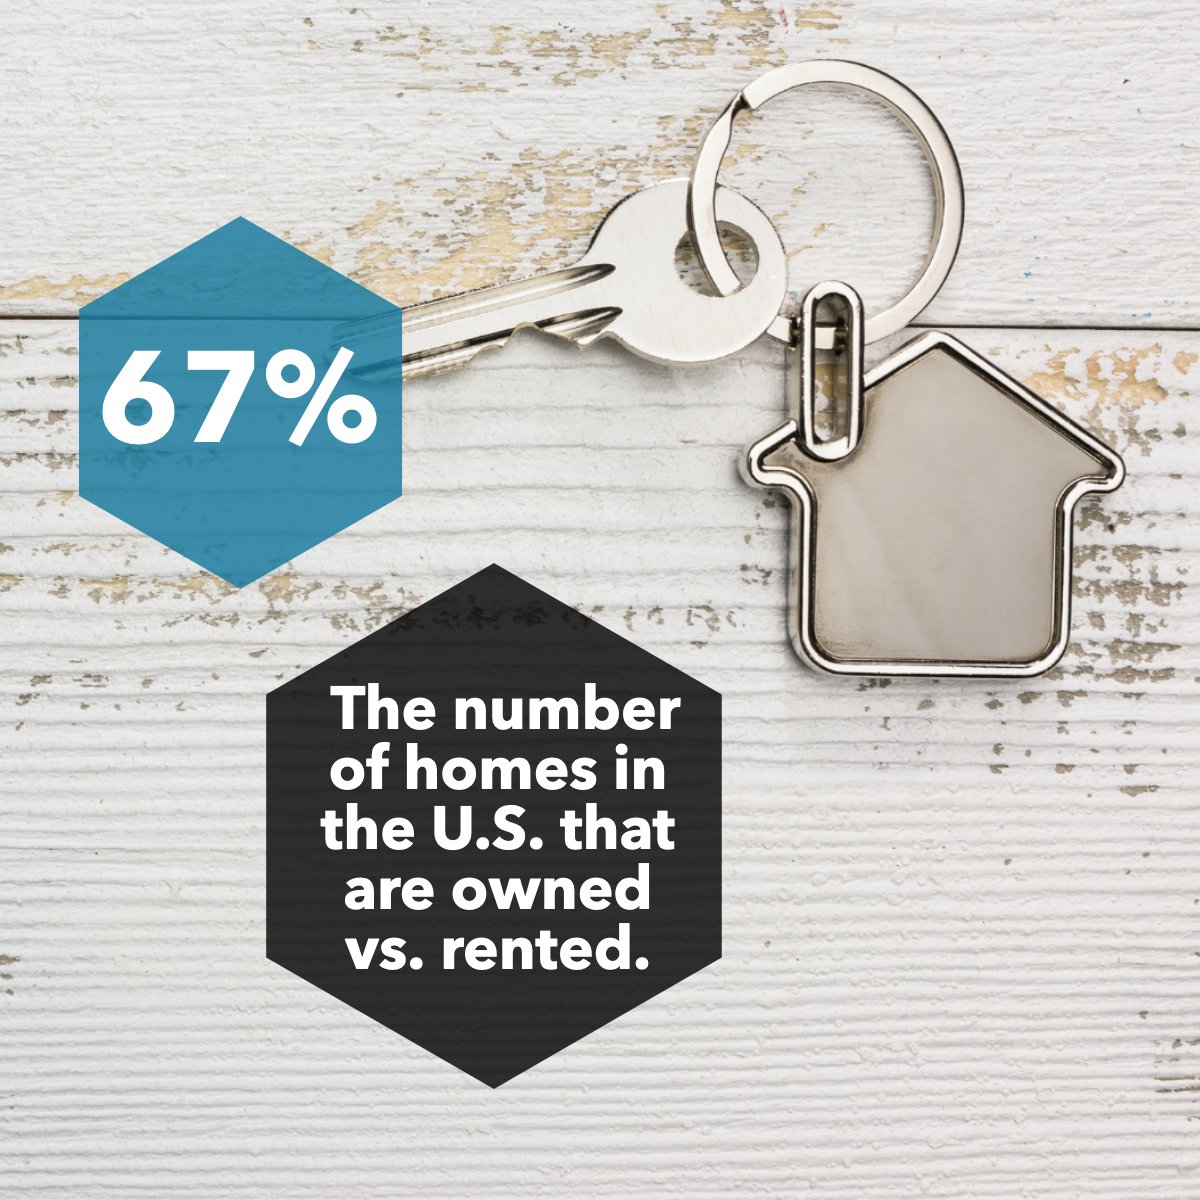 Did you know the amount of owned vs. rented houses in the US? 🤔 #homebuyer #owning #renting #didyouknow #realestatefacts #homeowner #facts